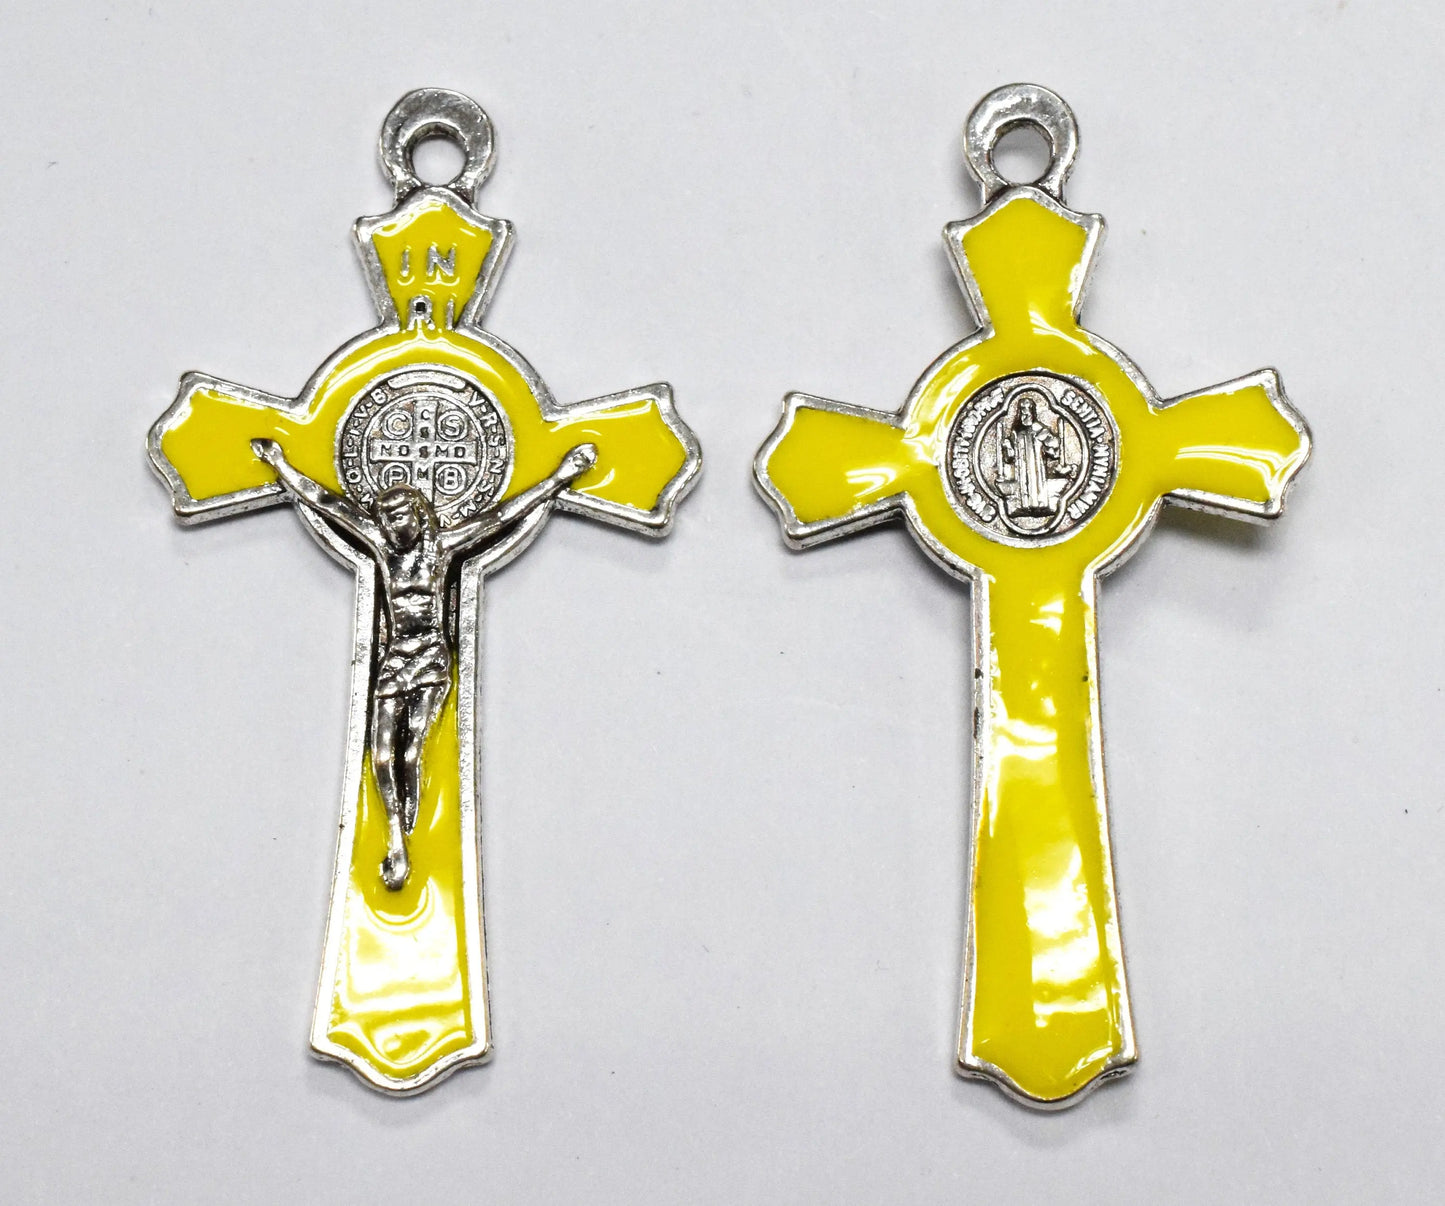 6 PCs Jesus Color Cross Charm Pendant Silver Base Metal Alloy Size 28x50mm For Jewelry Making and Wholesale White/Black/Yellow/Red/Blue - BeadsFindingDepot